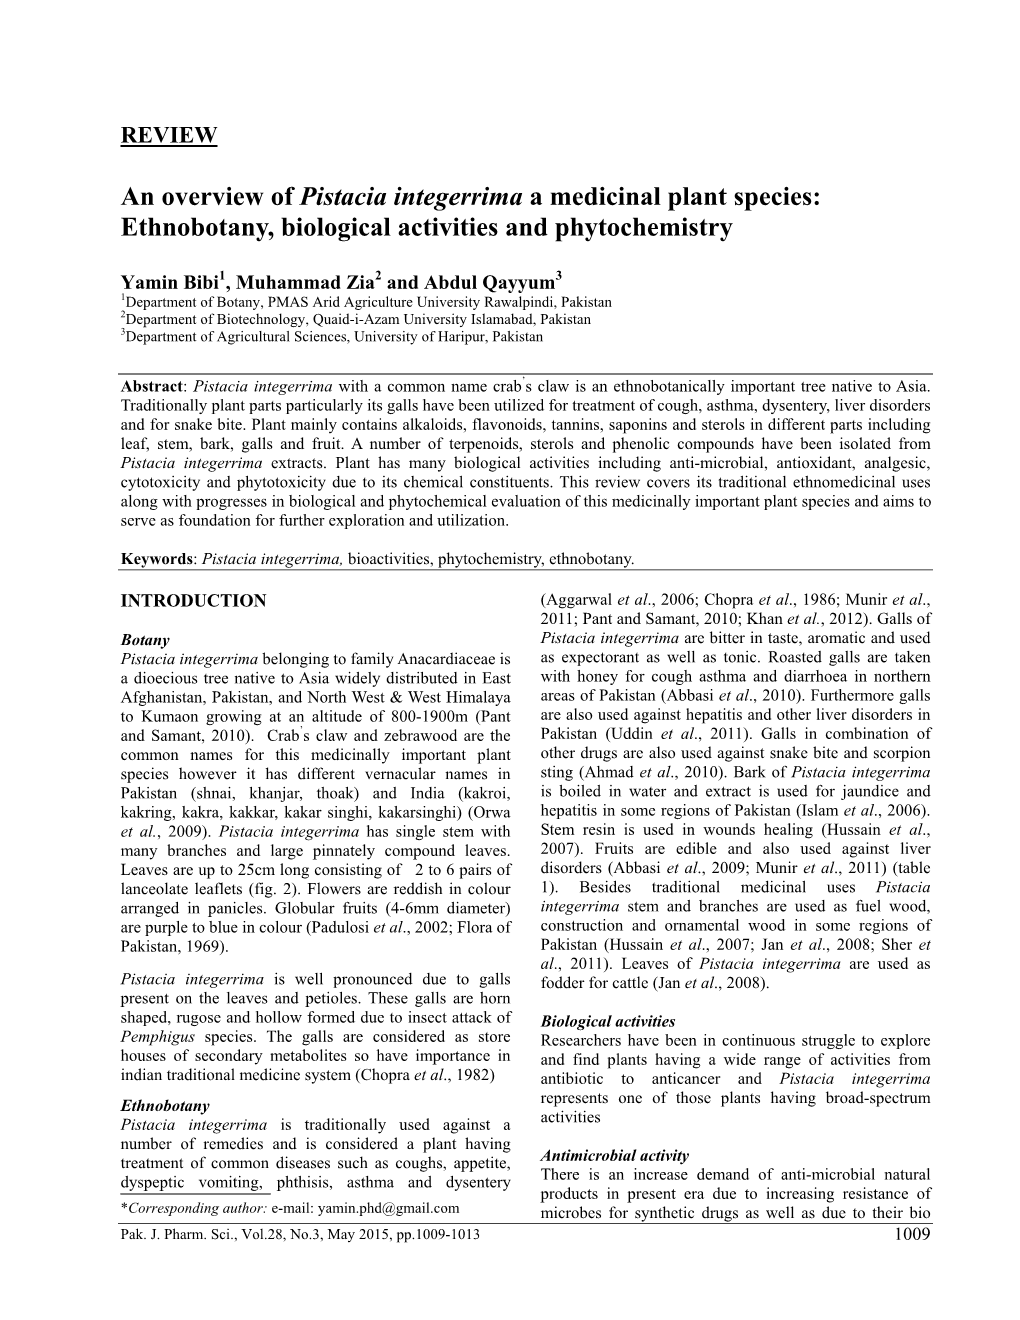 An Overview of Pistacia Integerrima a Medicinal Plant Species: Ethnobotany, Biological Activities and Phytochemistry